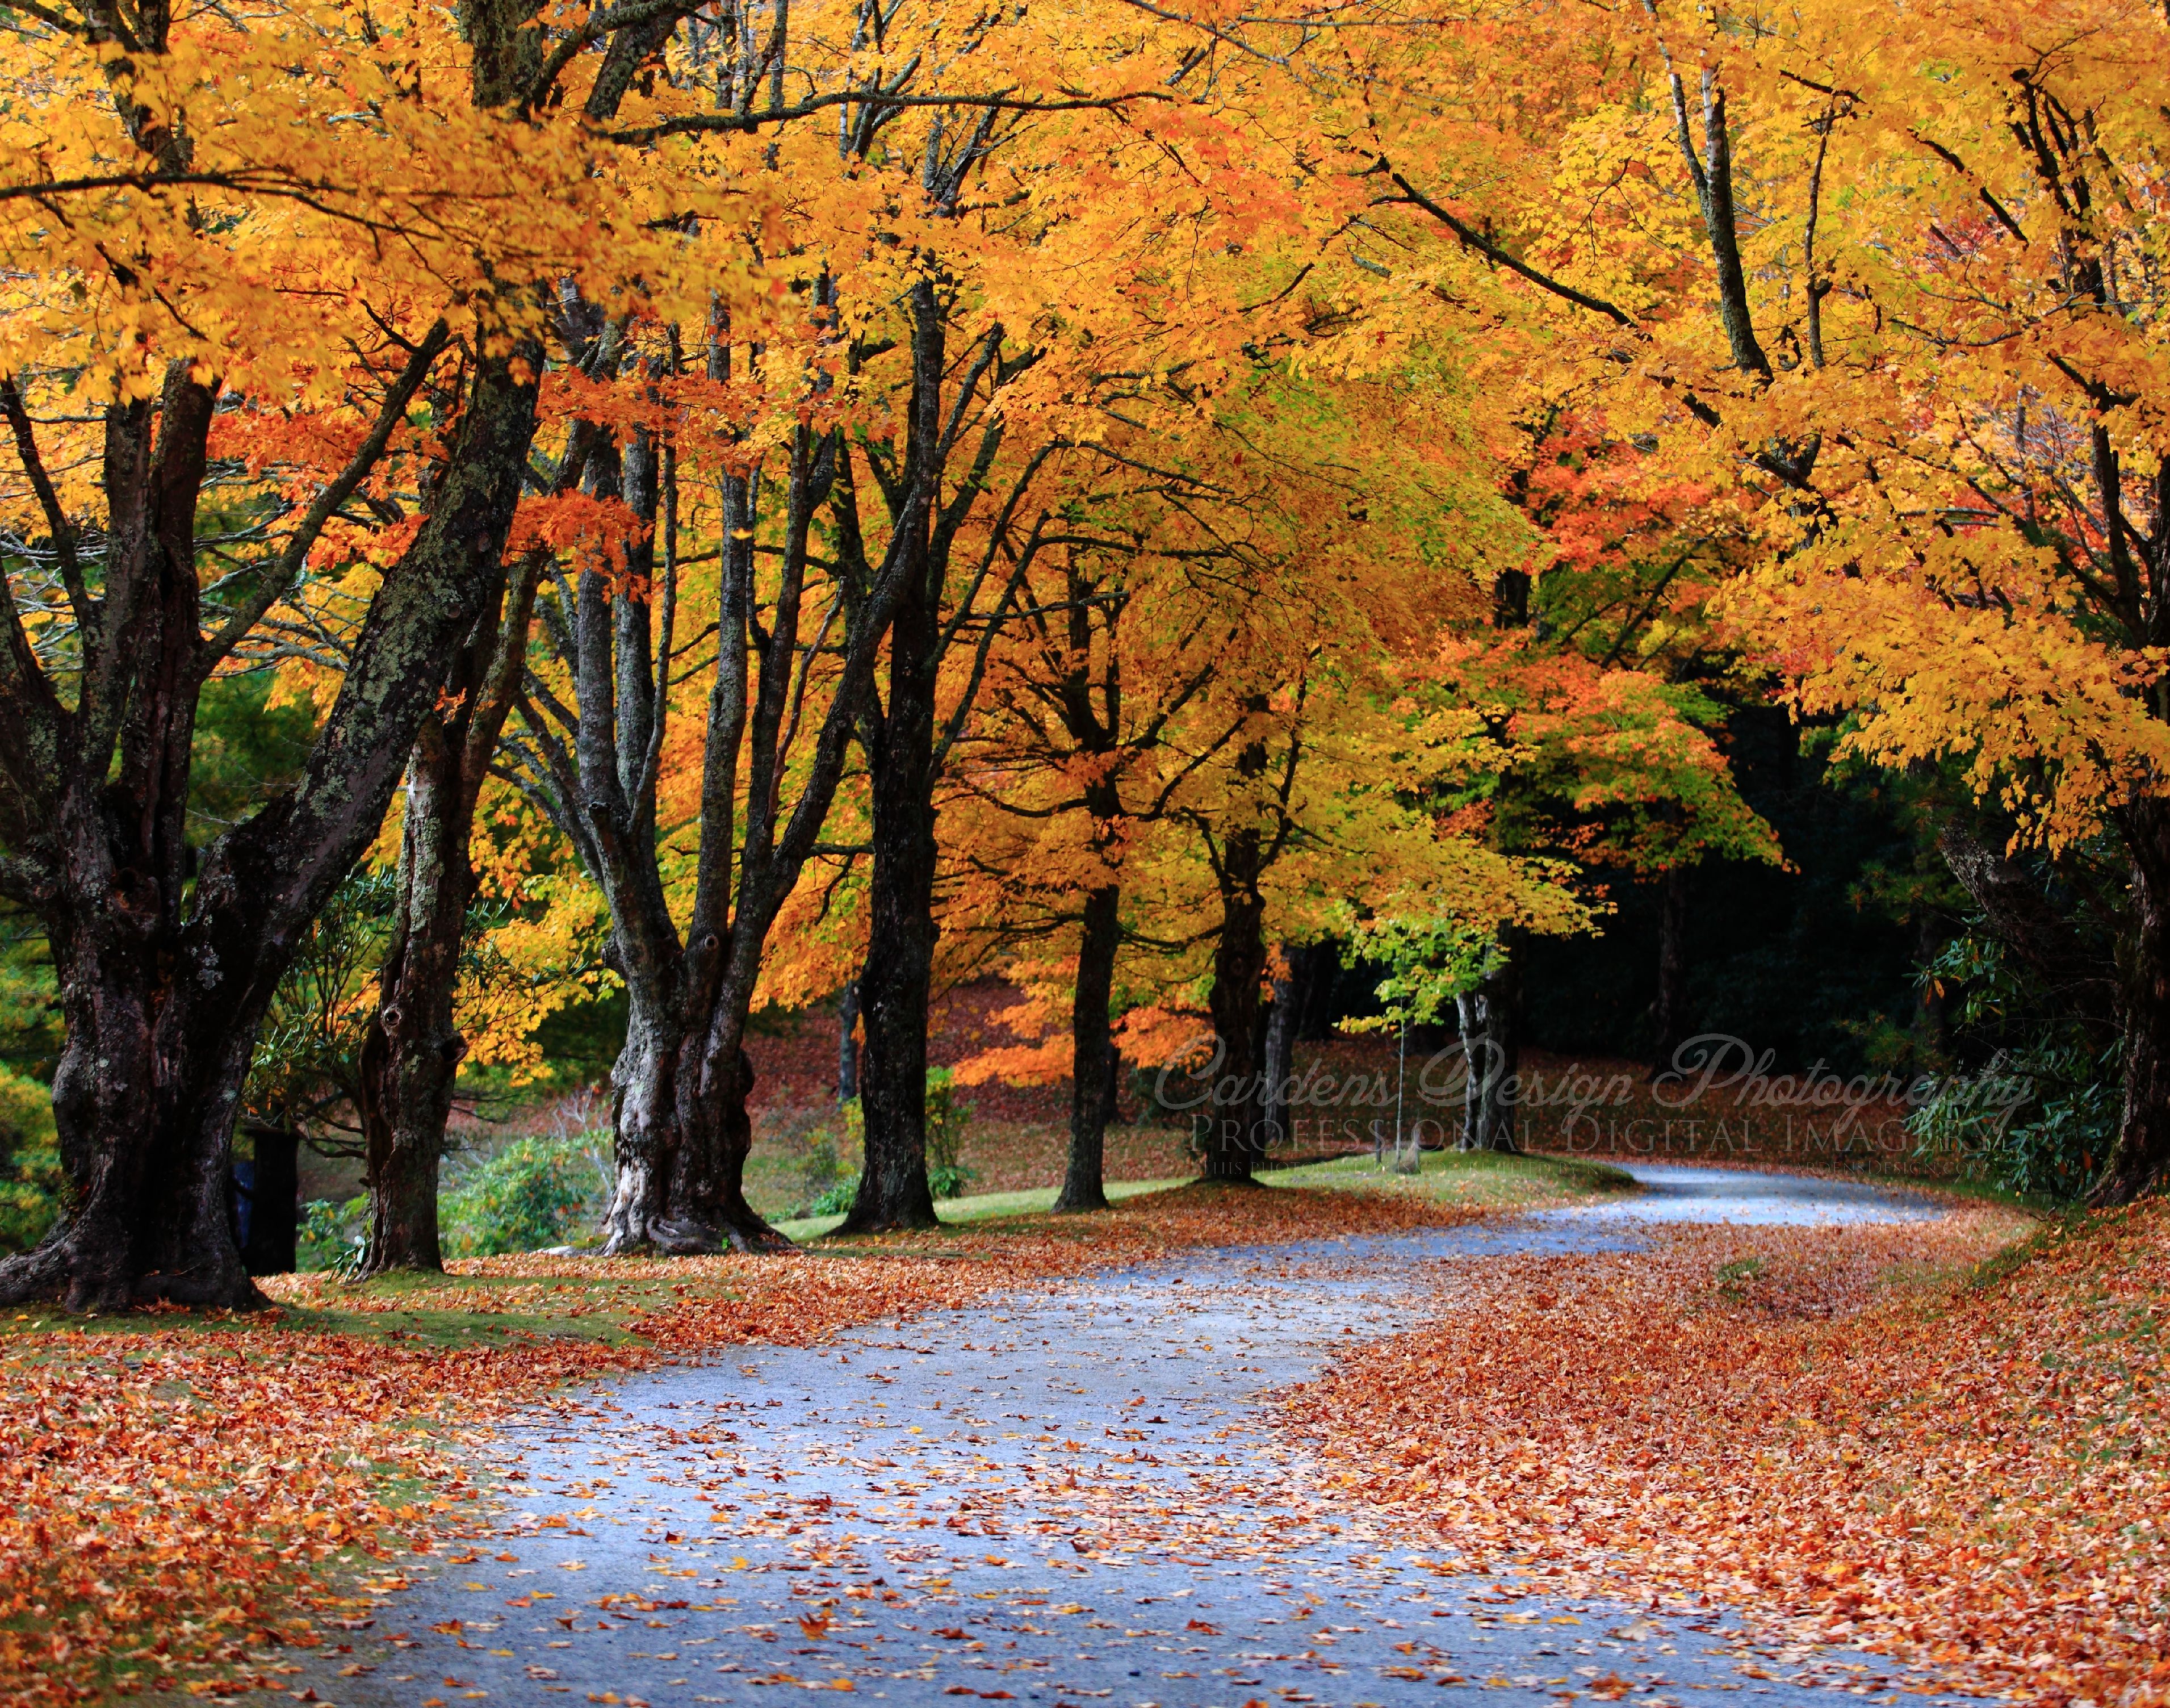 autumn/fall pictures | Image Code: Autumn_0001 (Tags: Pathway, Fall ...